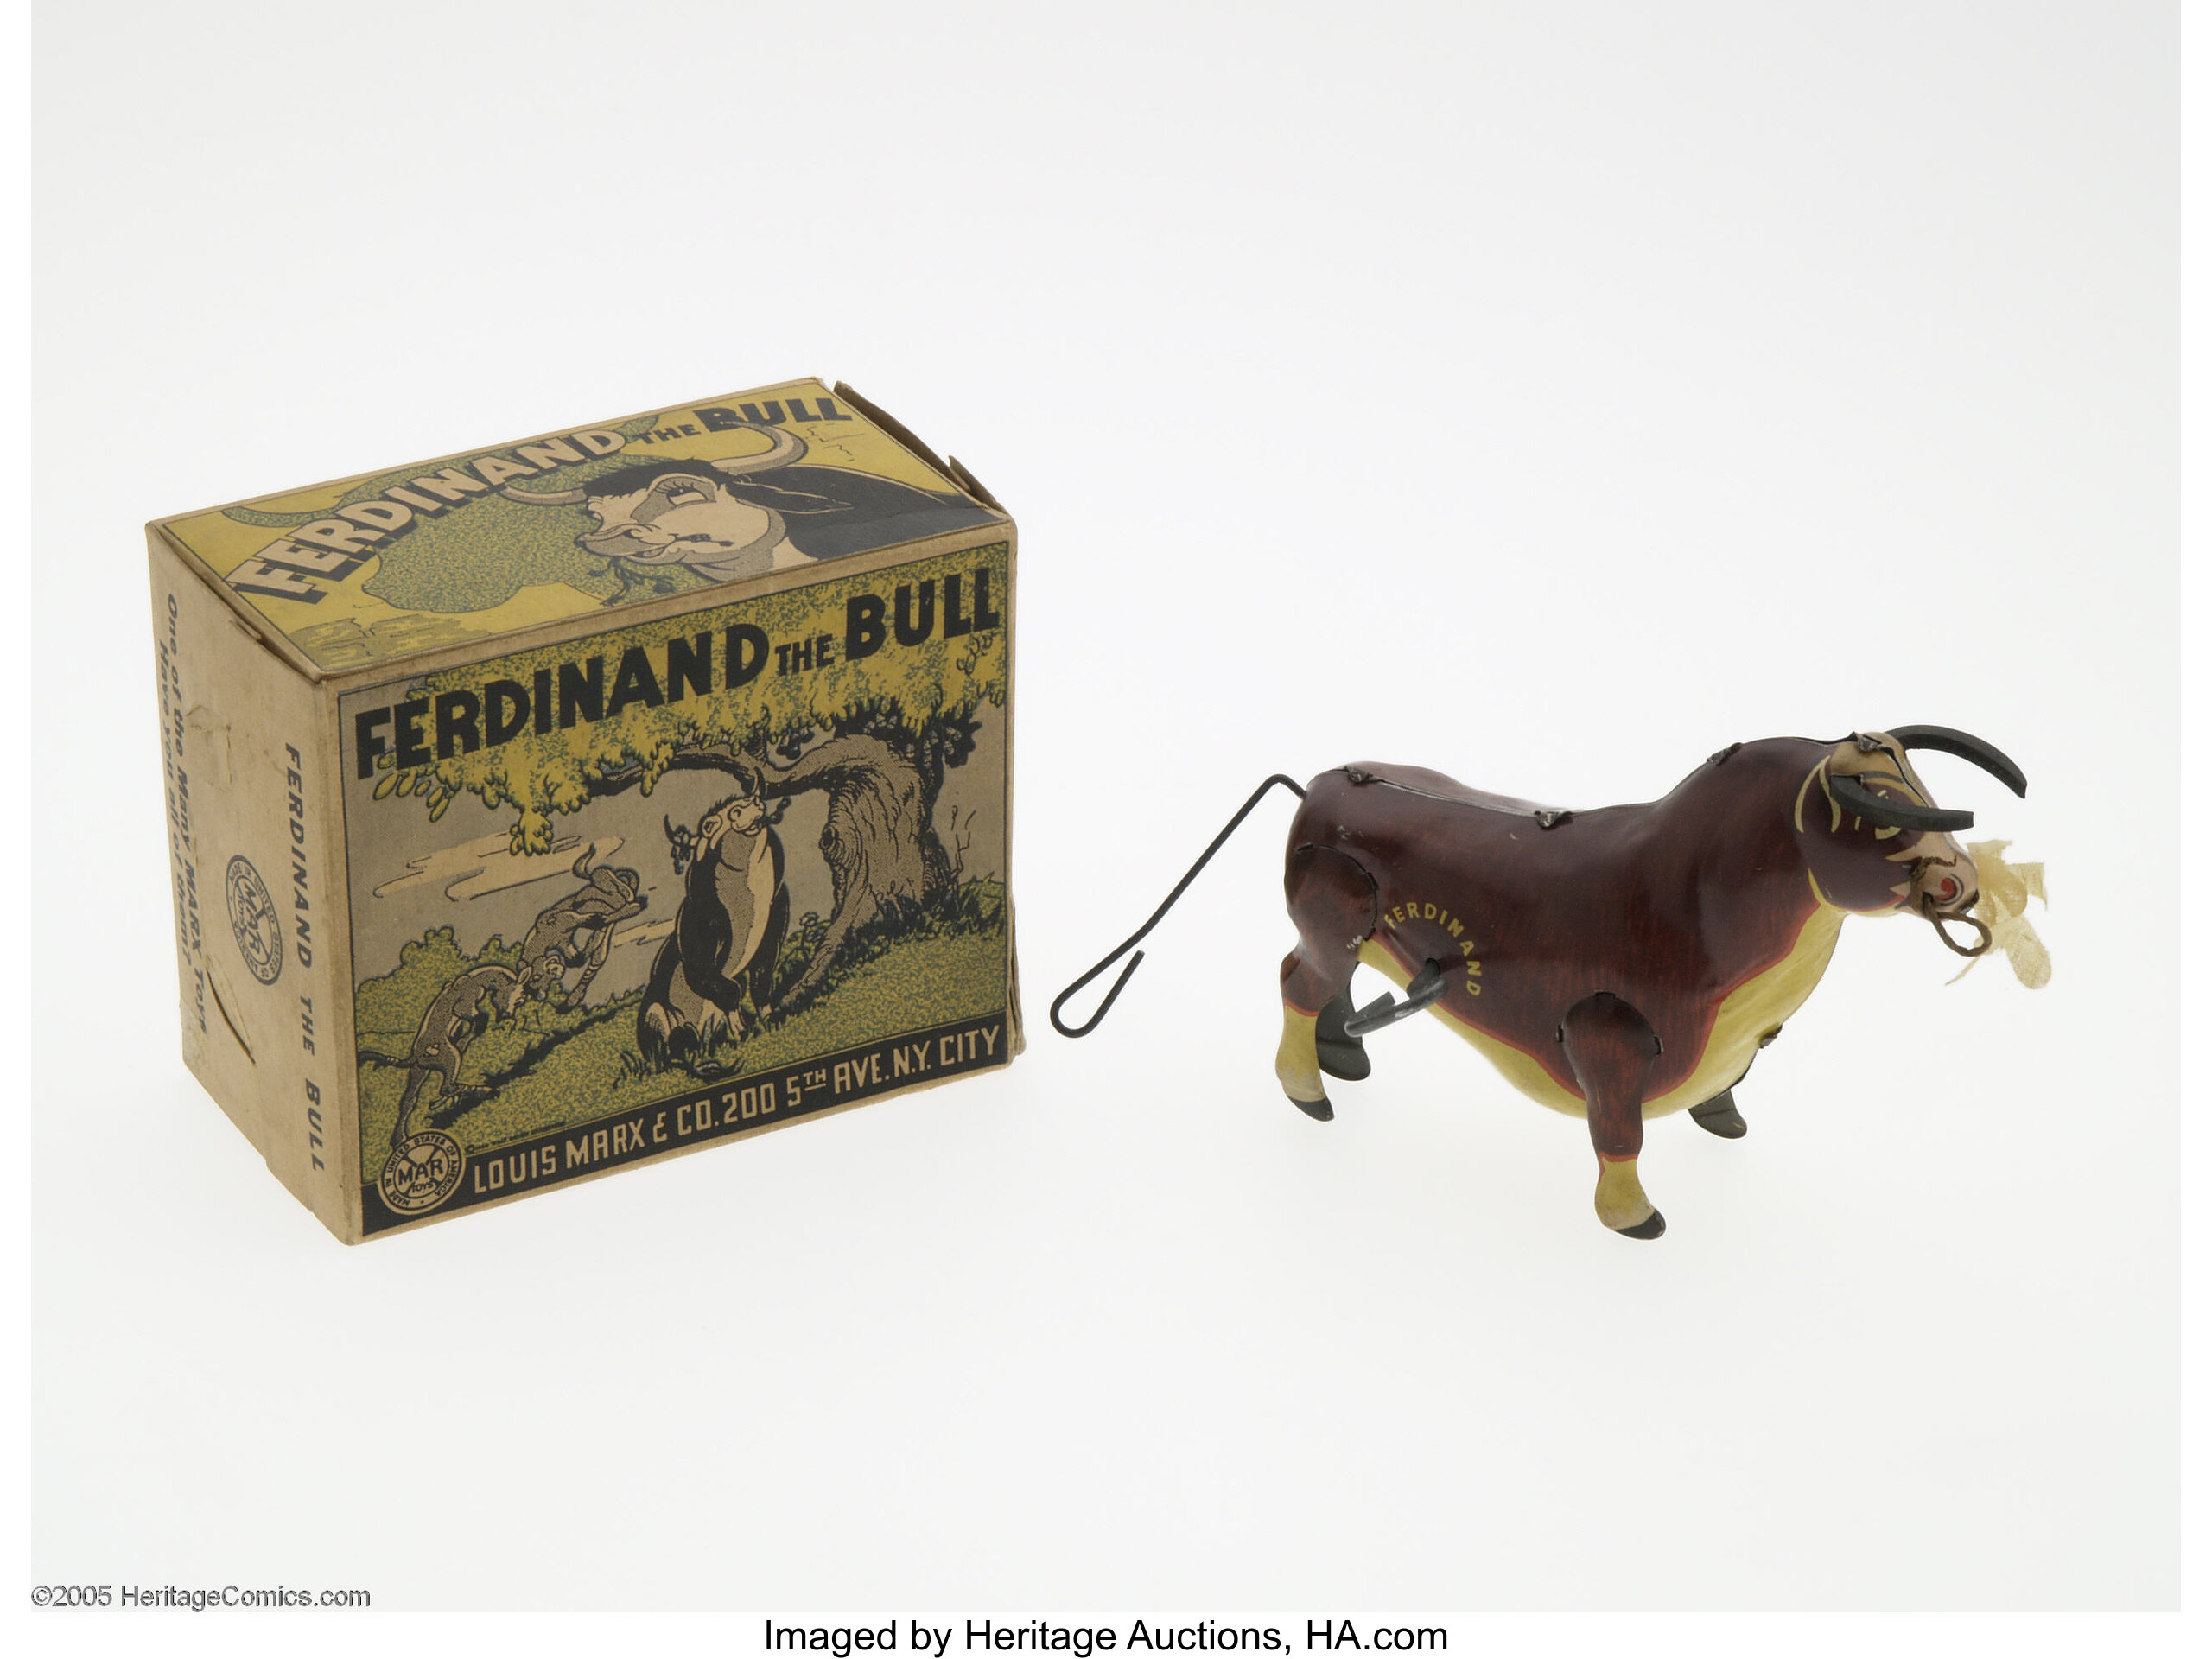 The Cardboard and Me: That's a lot of Bull!